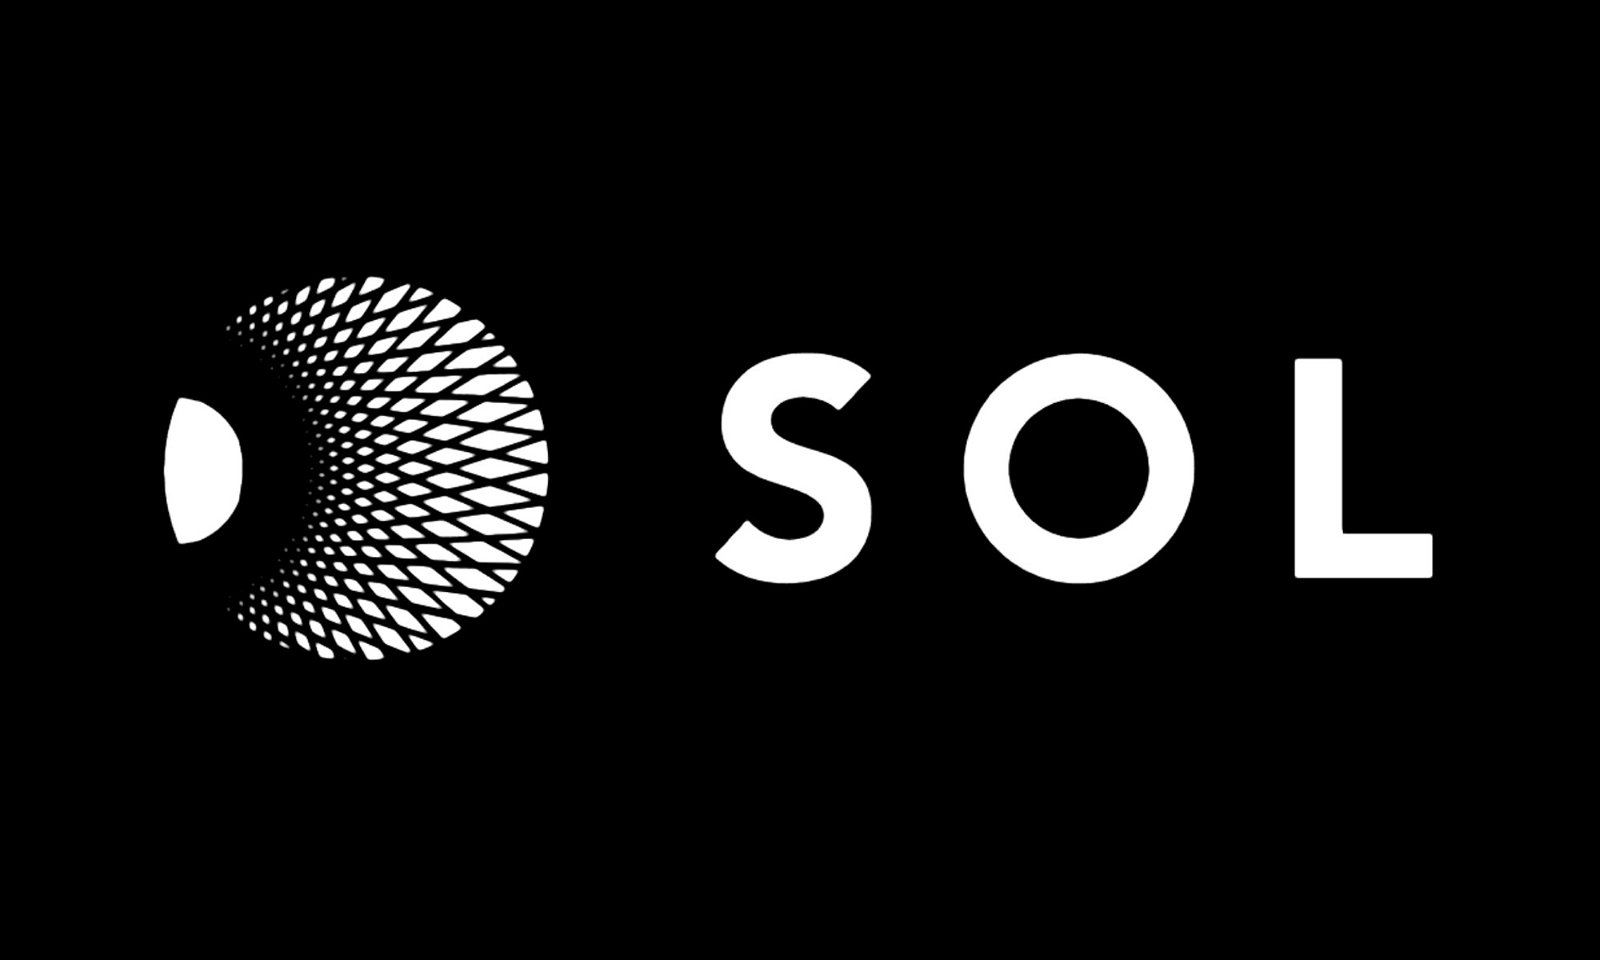 The Sol Foundation